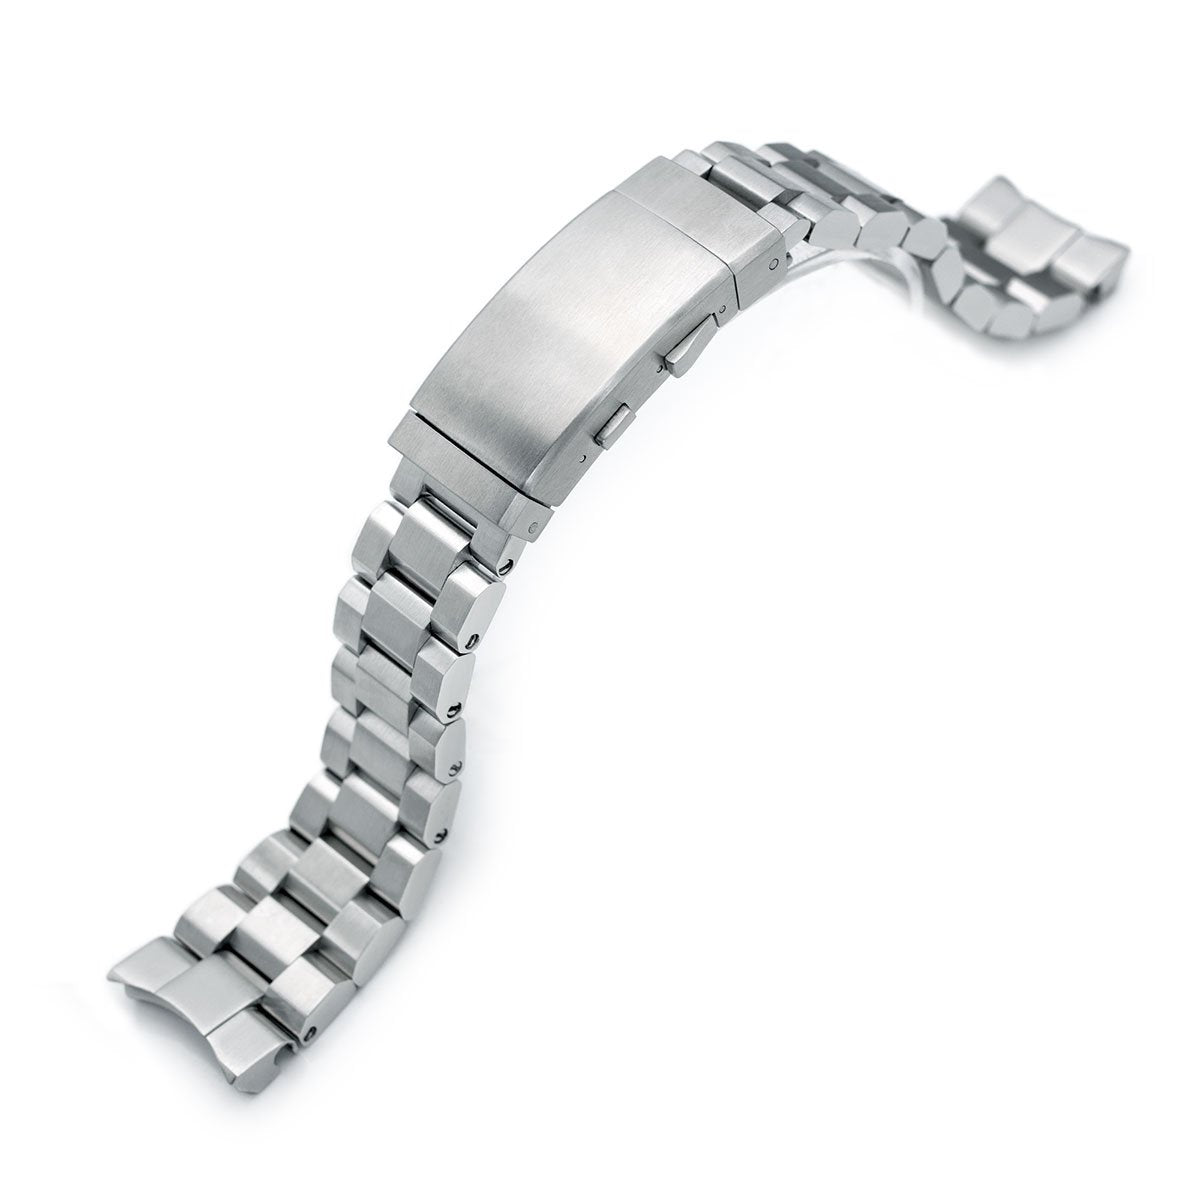 Seiko Mod new Turtles SRP777 Curved End Hexad Bracelet  Strapcode